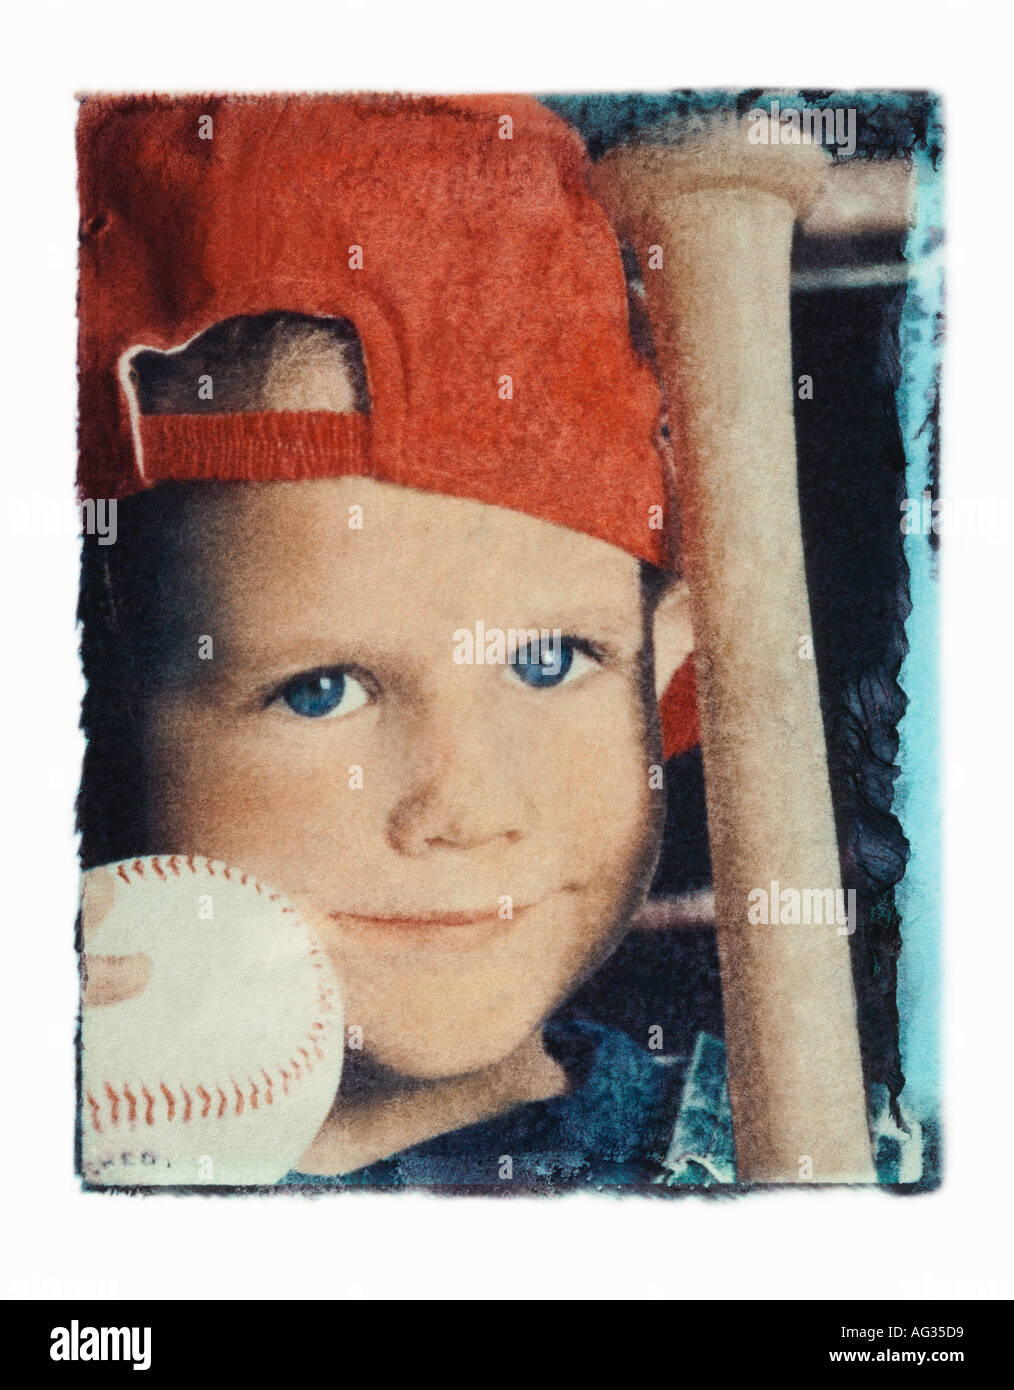 Polaroid transfer portrait of young boy with baseball and bat Stock Photo